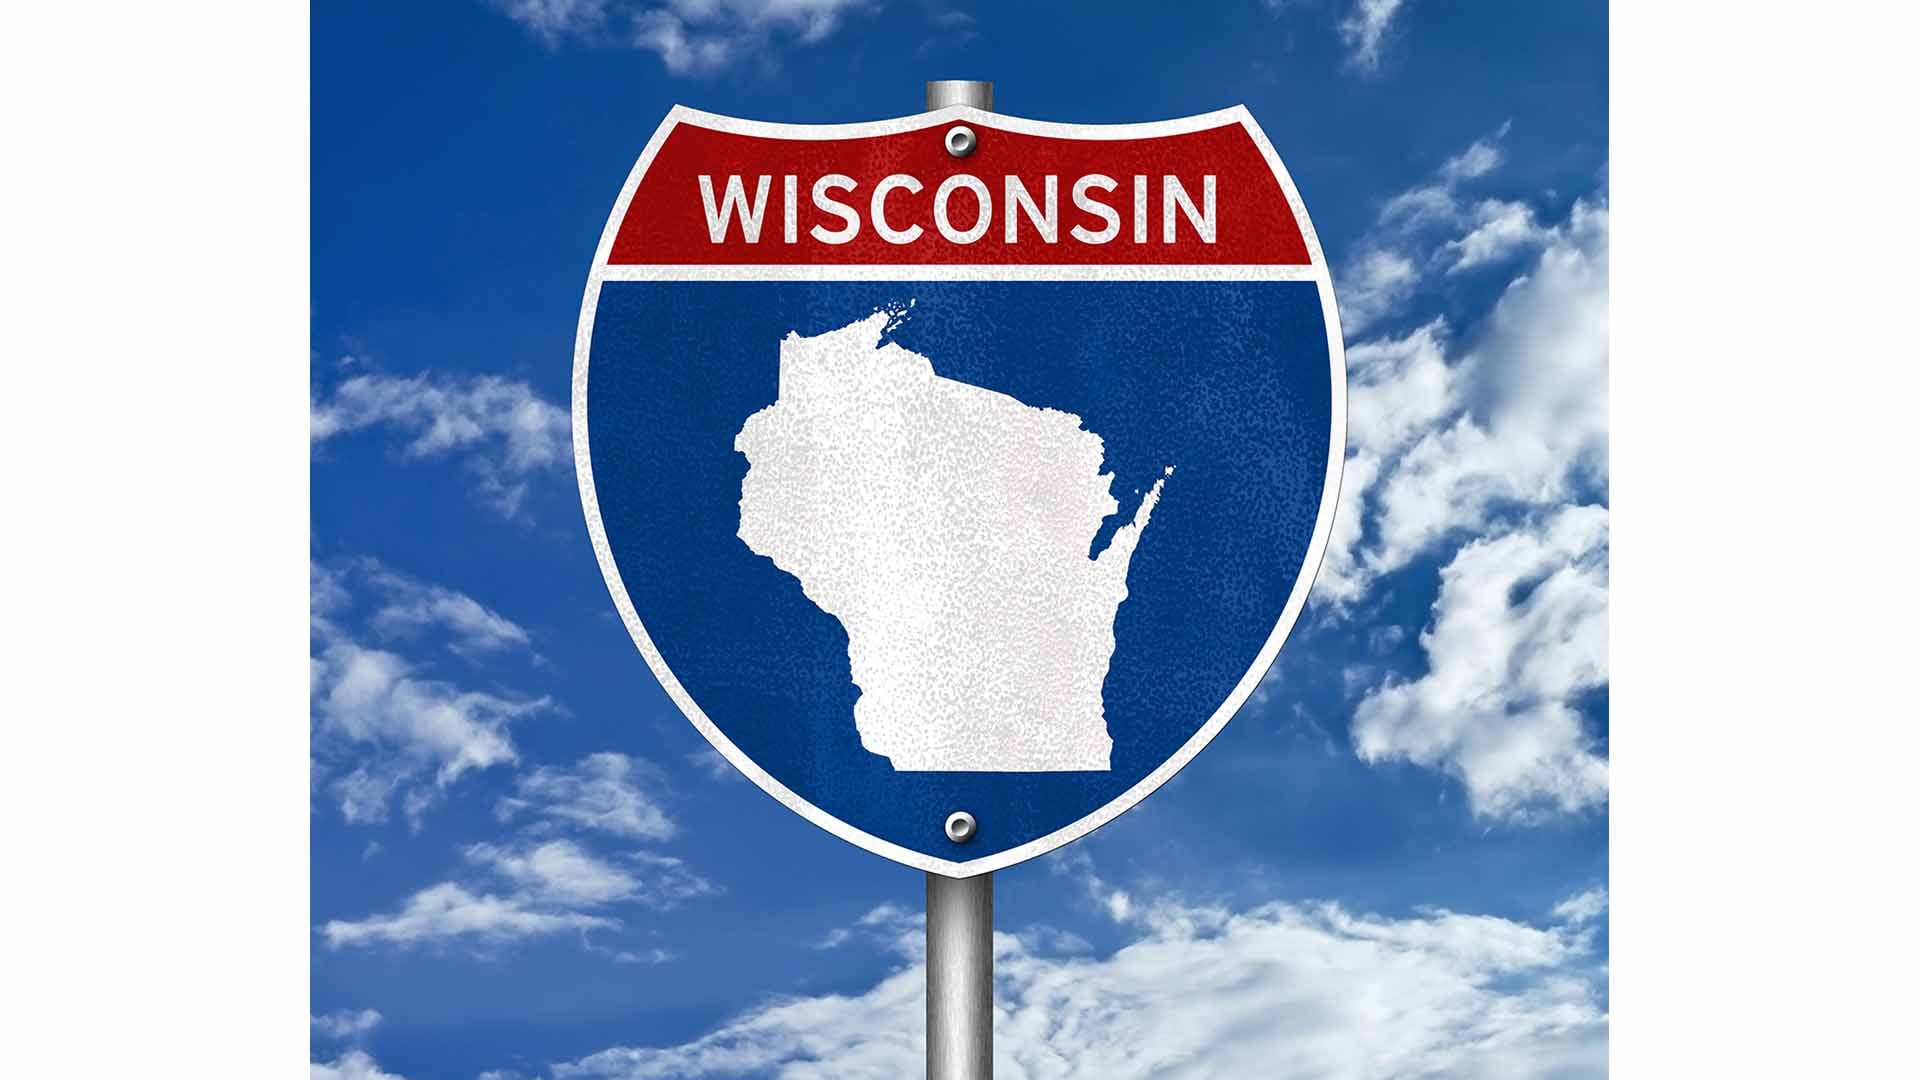 Wisconsin state roadside sign